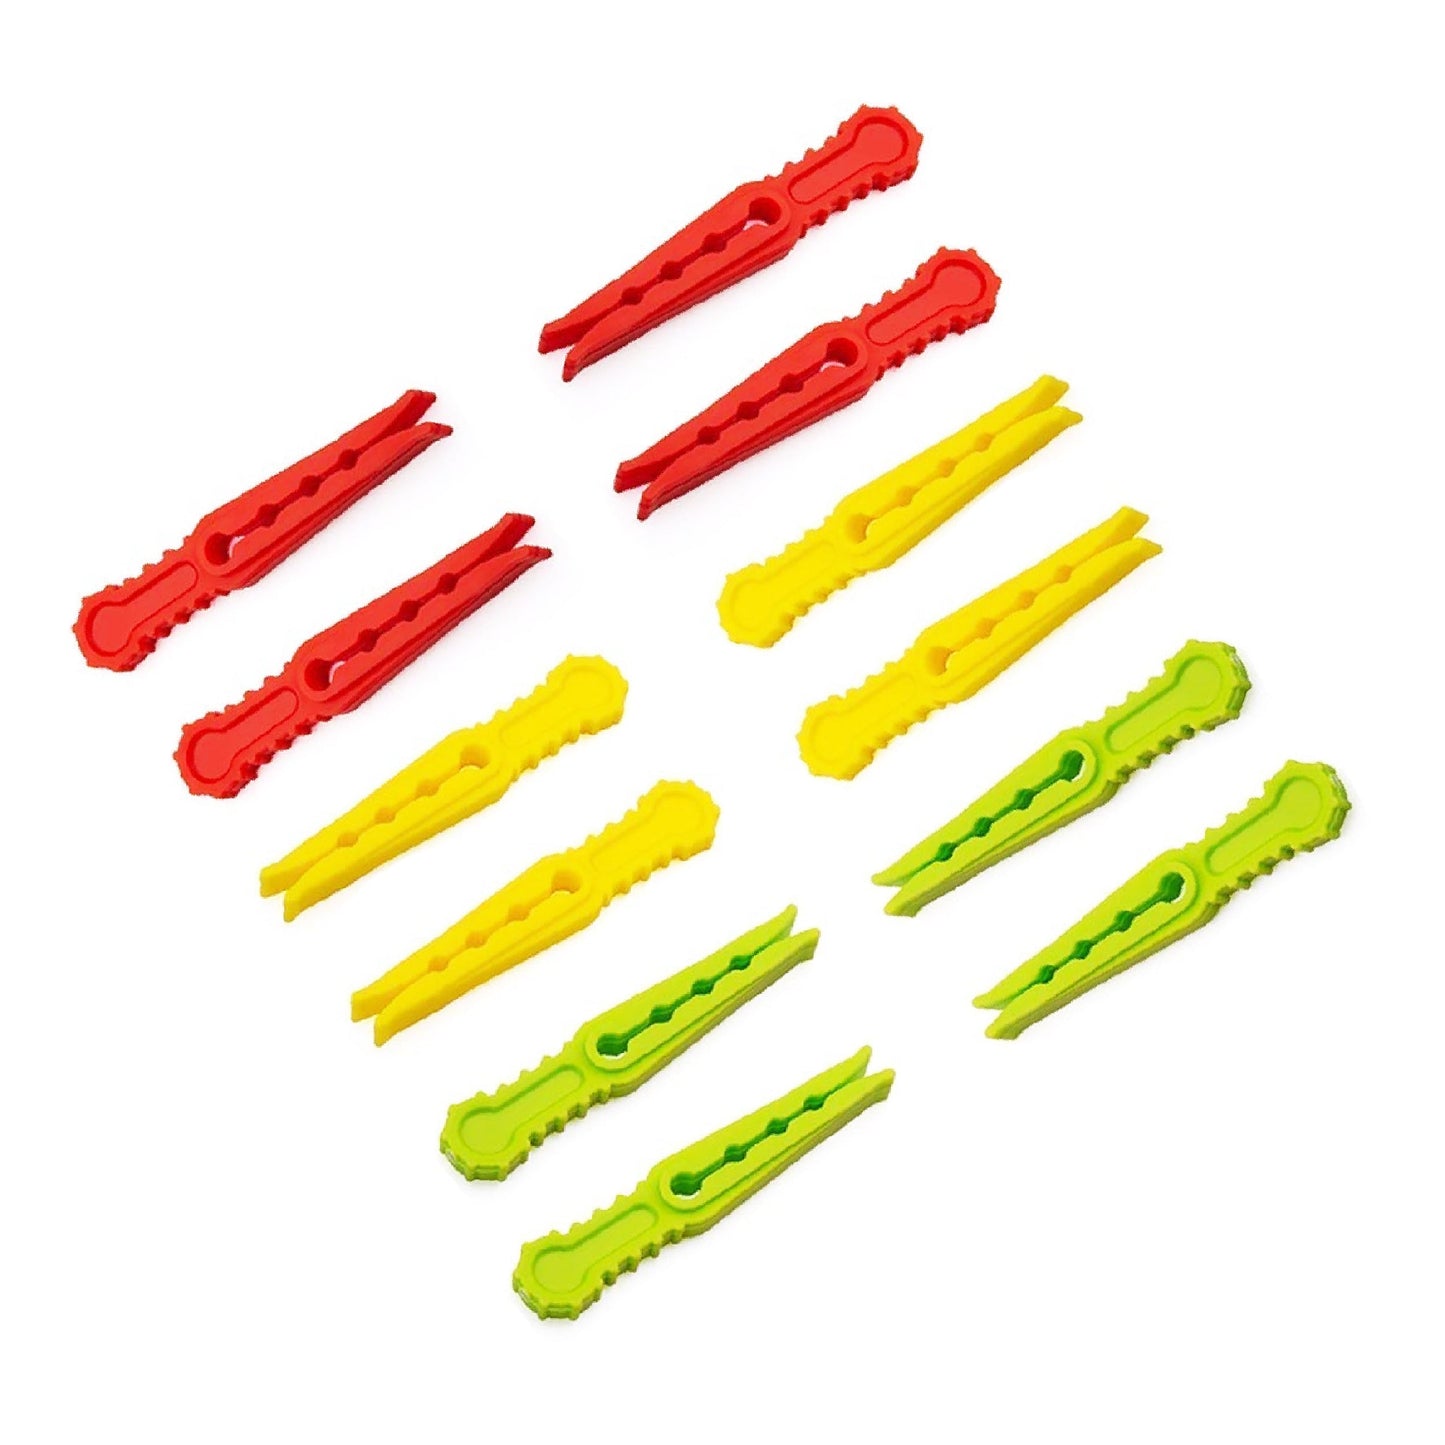 0335 Multipurpose Plastic Cloth Hanging Pegs/Clips - 36 pcs - SWASTIK CREATIONS The Trend Point SWASTIK CREATIONS The Trend Point